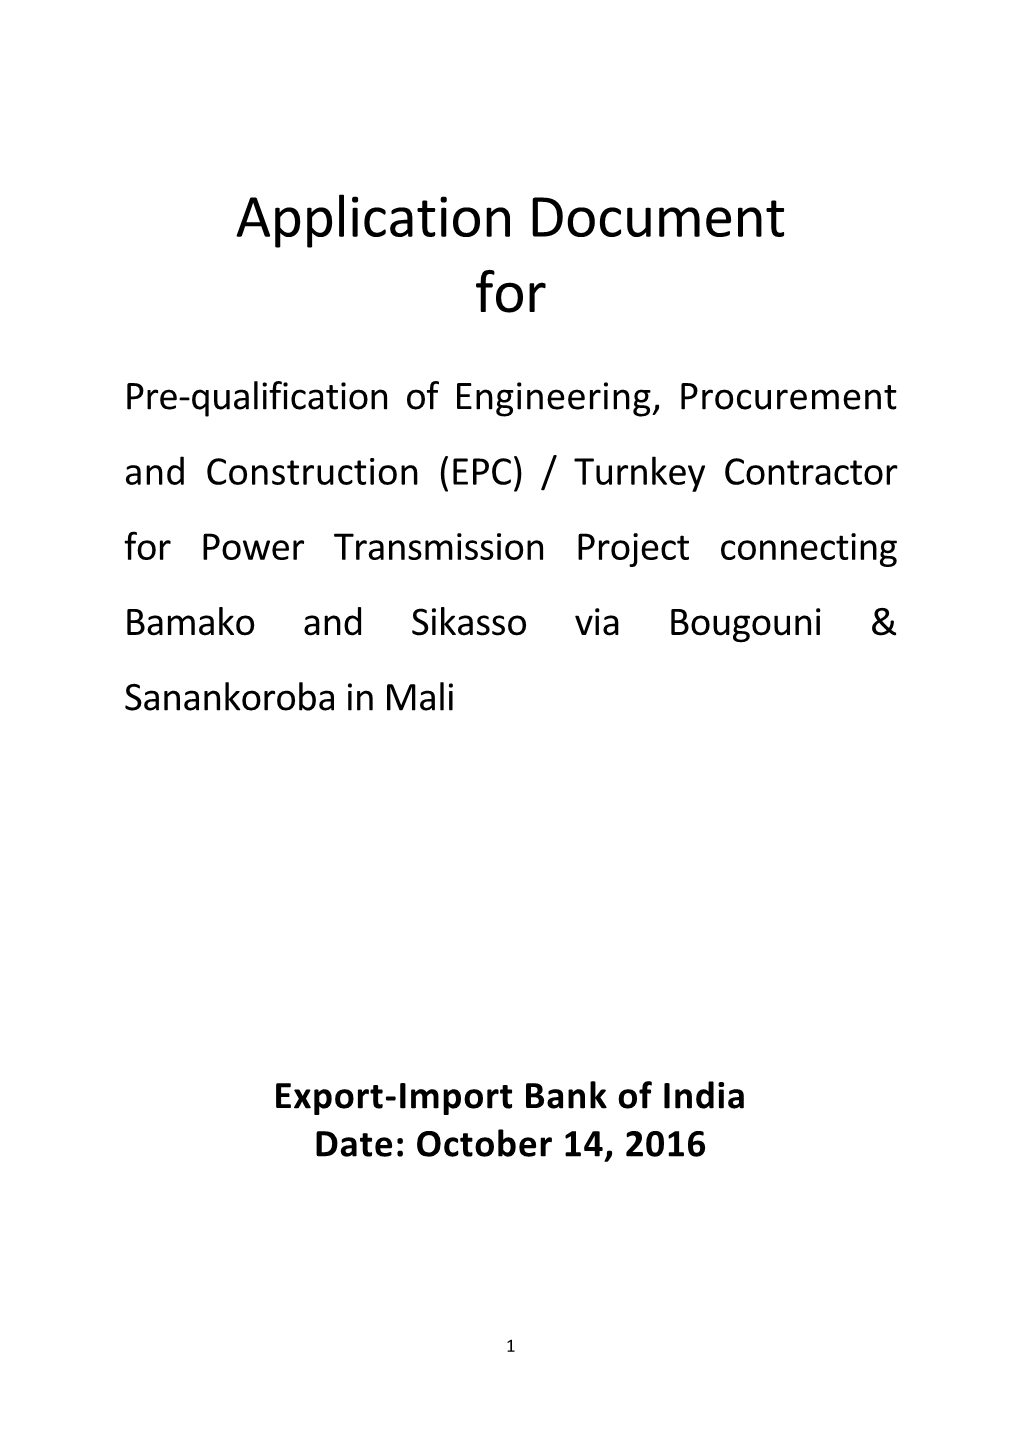 Application Document For